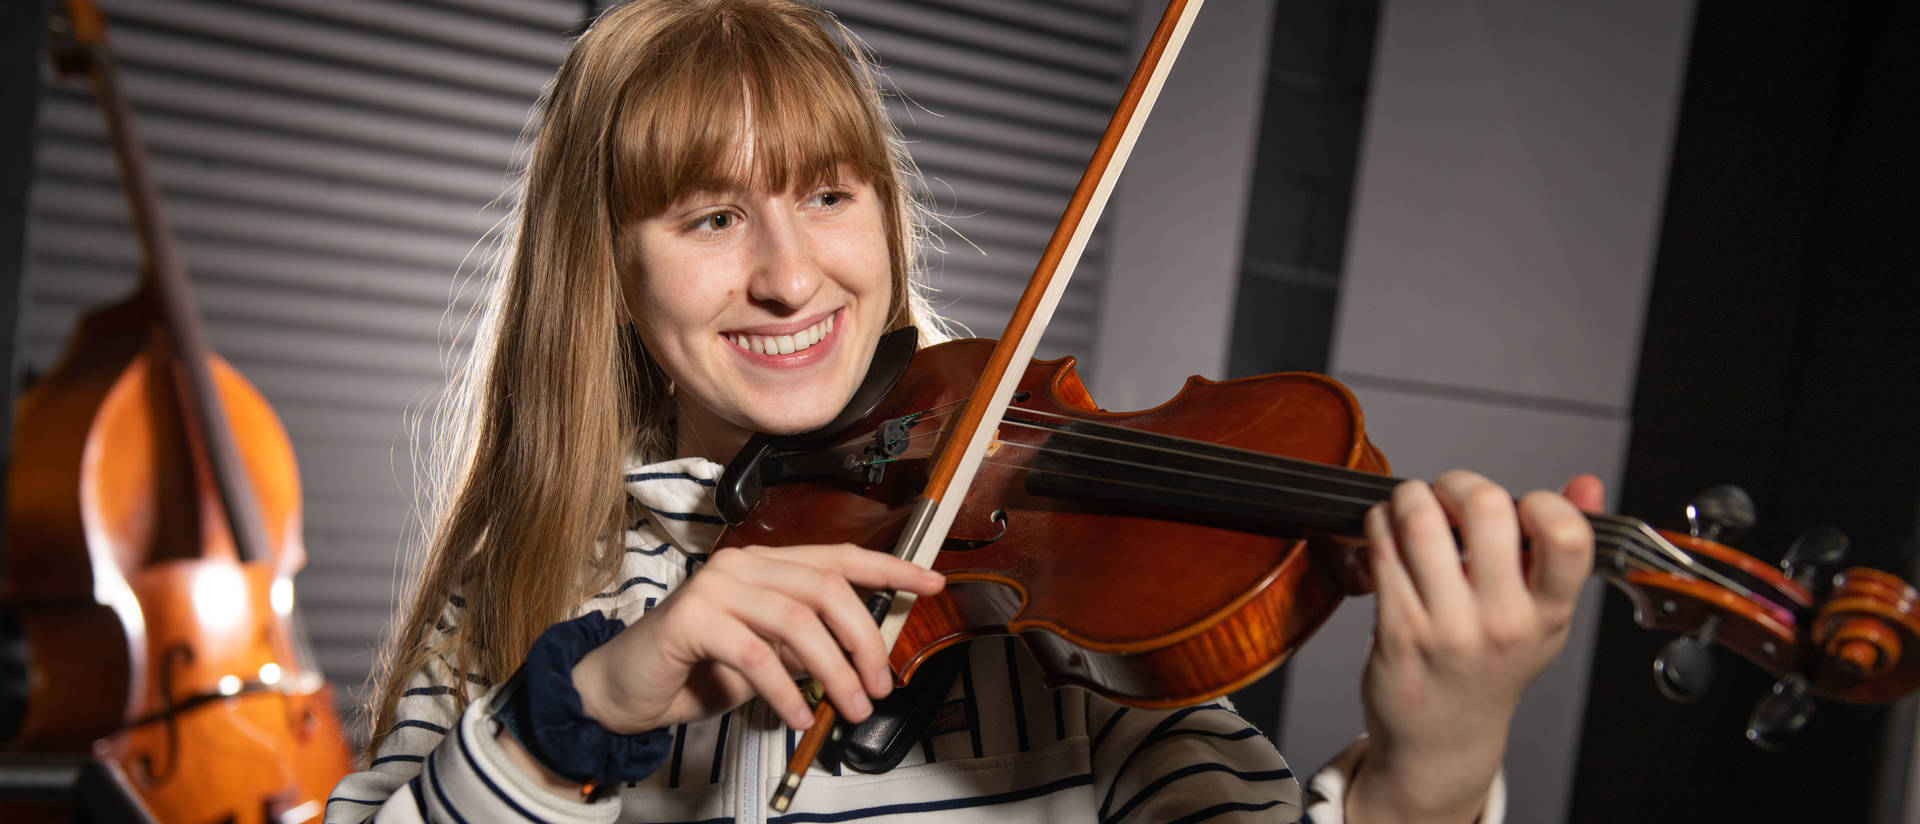 A person plays the violin while smiling.